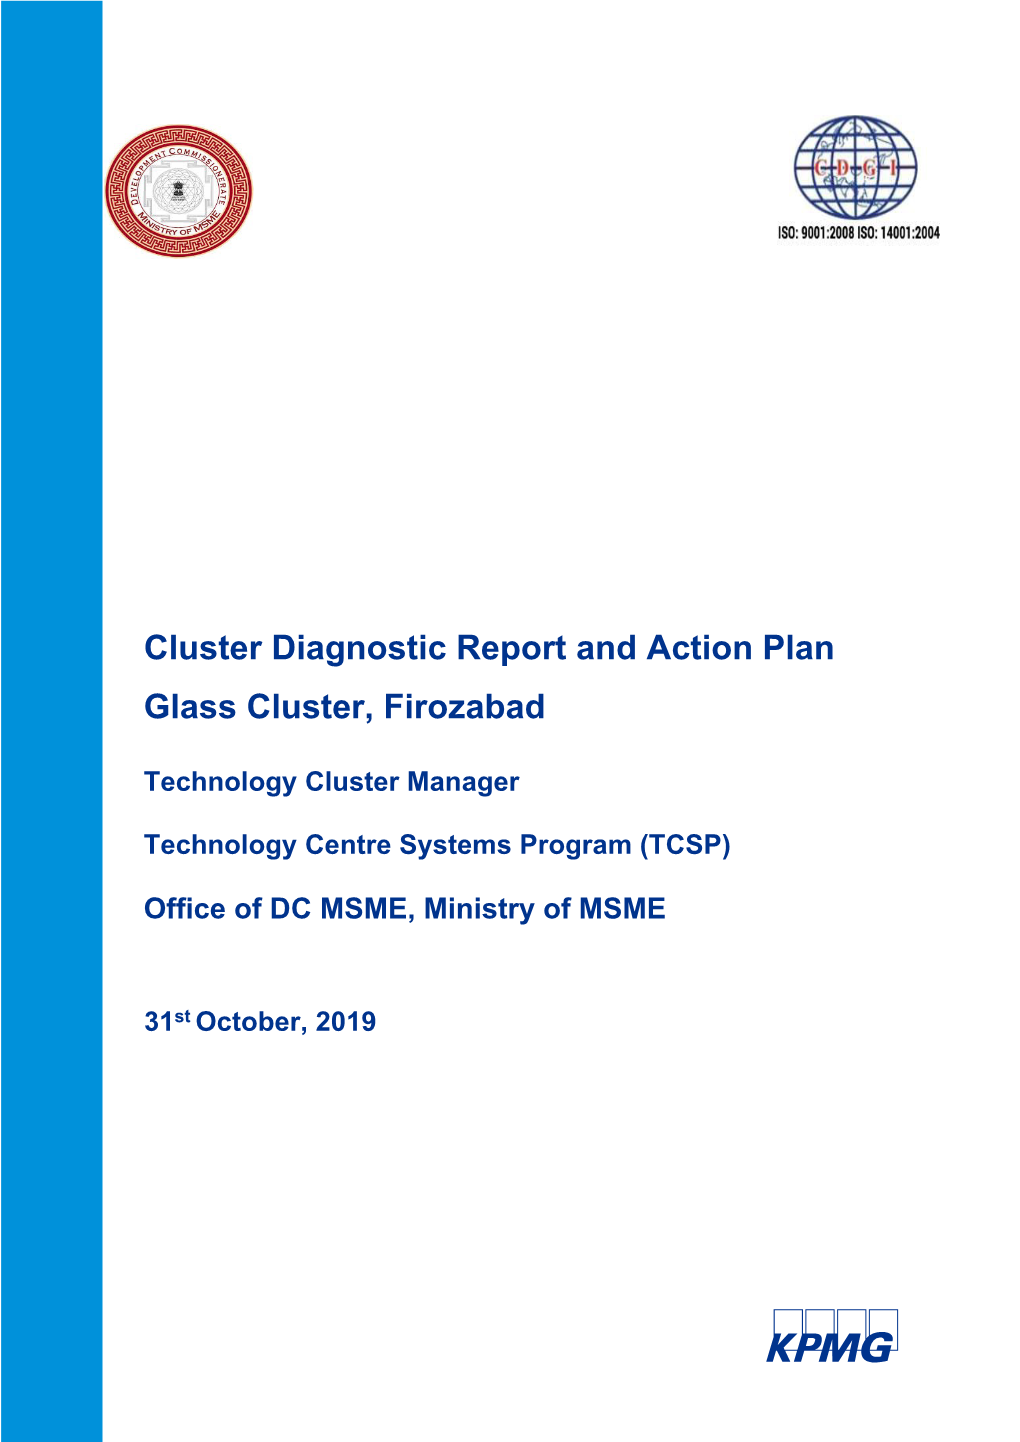 Cluster Diagnostic Report and Action Plan Glass Cluster, Firozabad